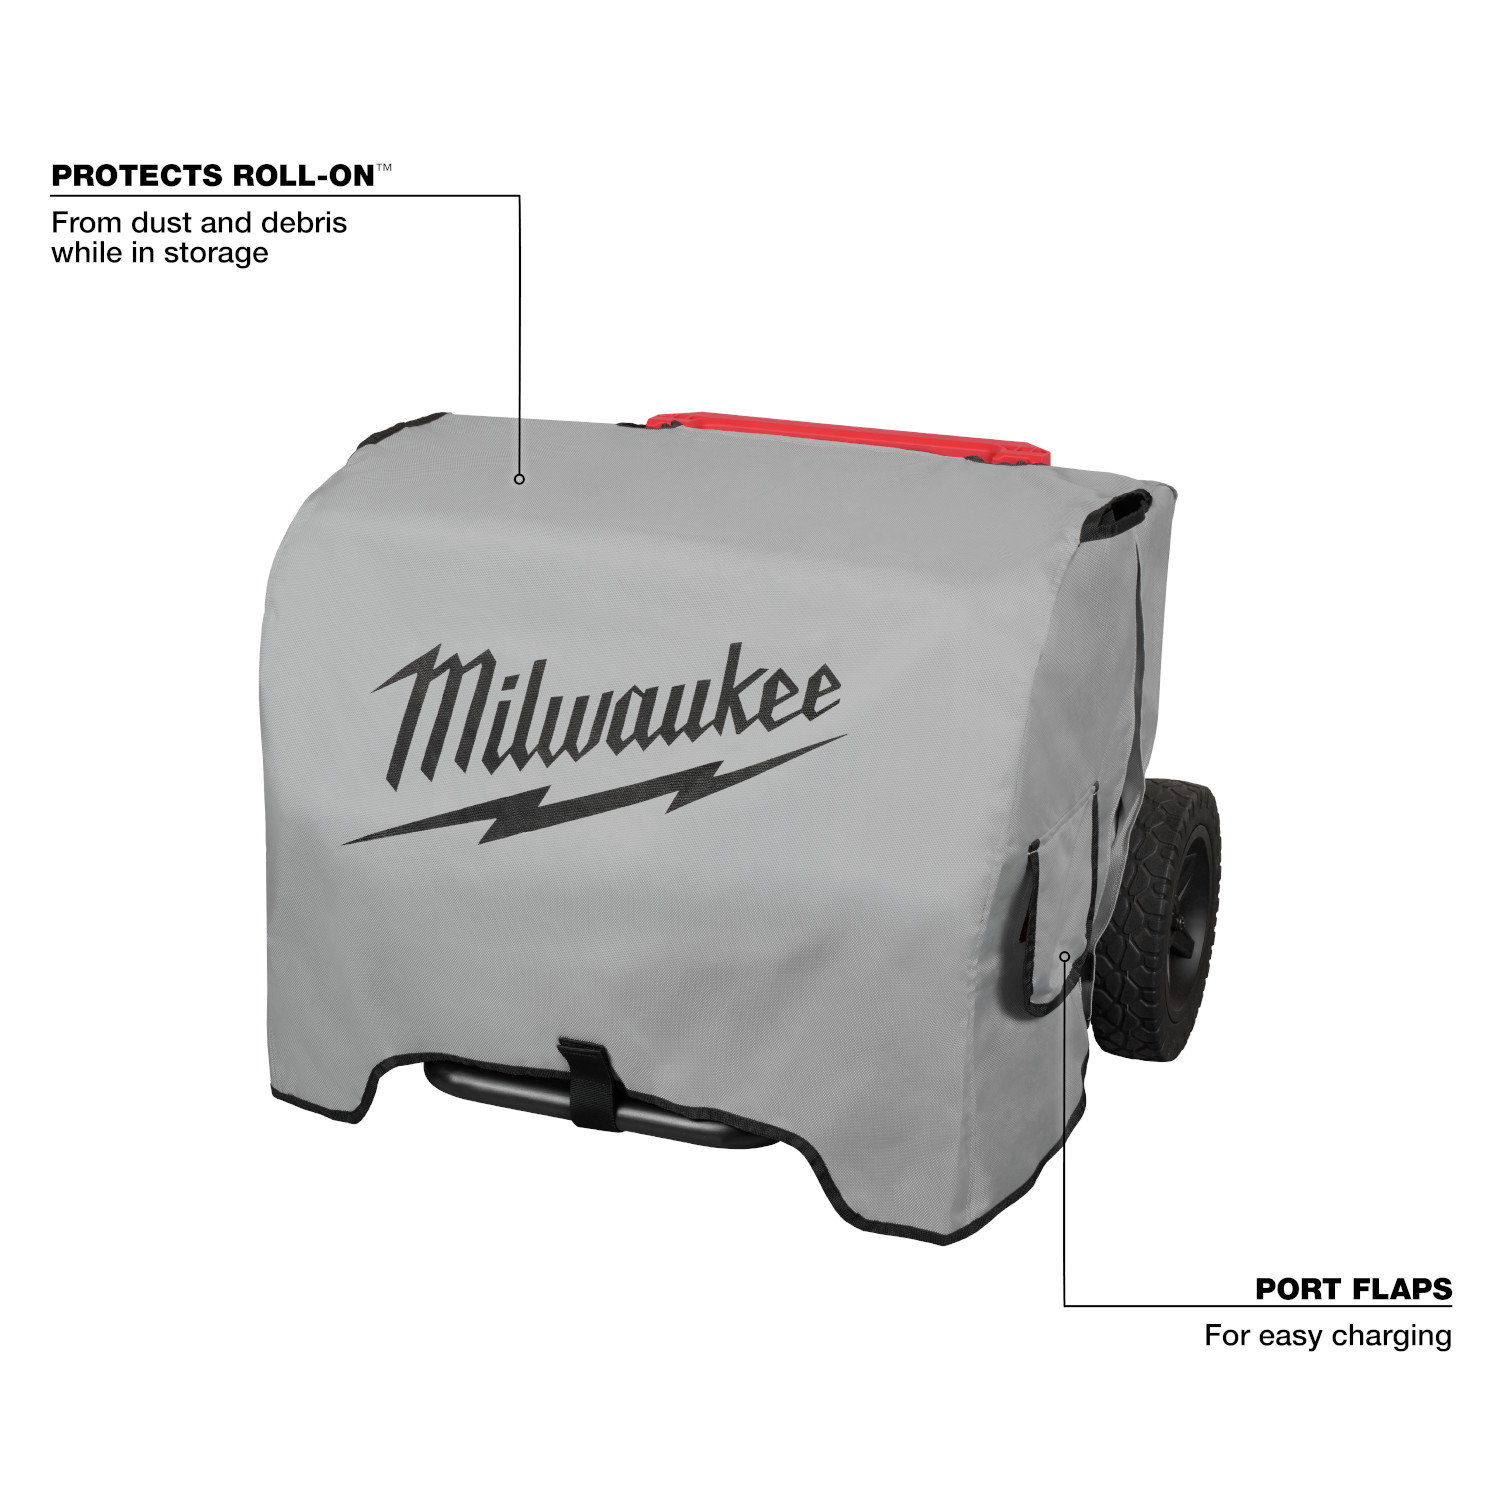 Milwaukee ROLL-ON 7200W/3600W 2.5kWh Power Supply Protective Cover from Columbia Safety